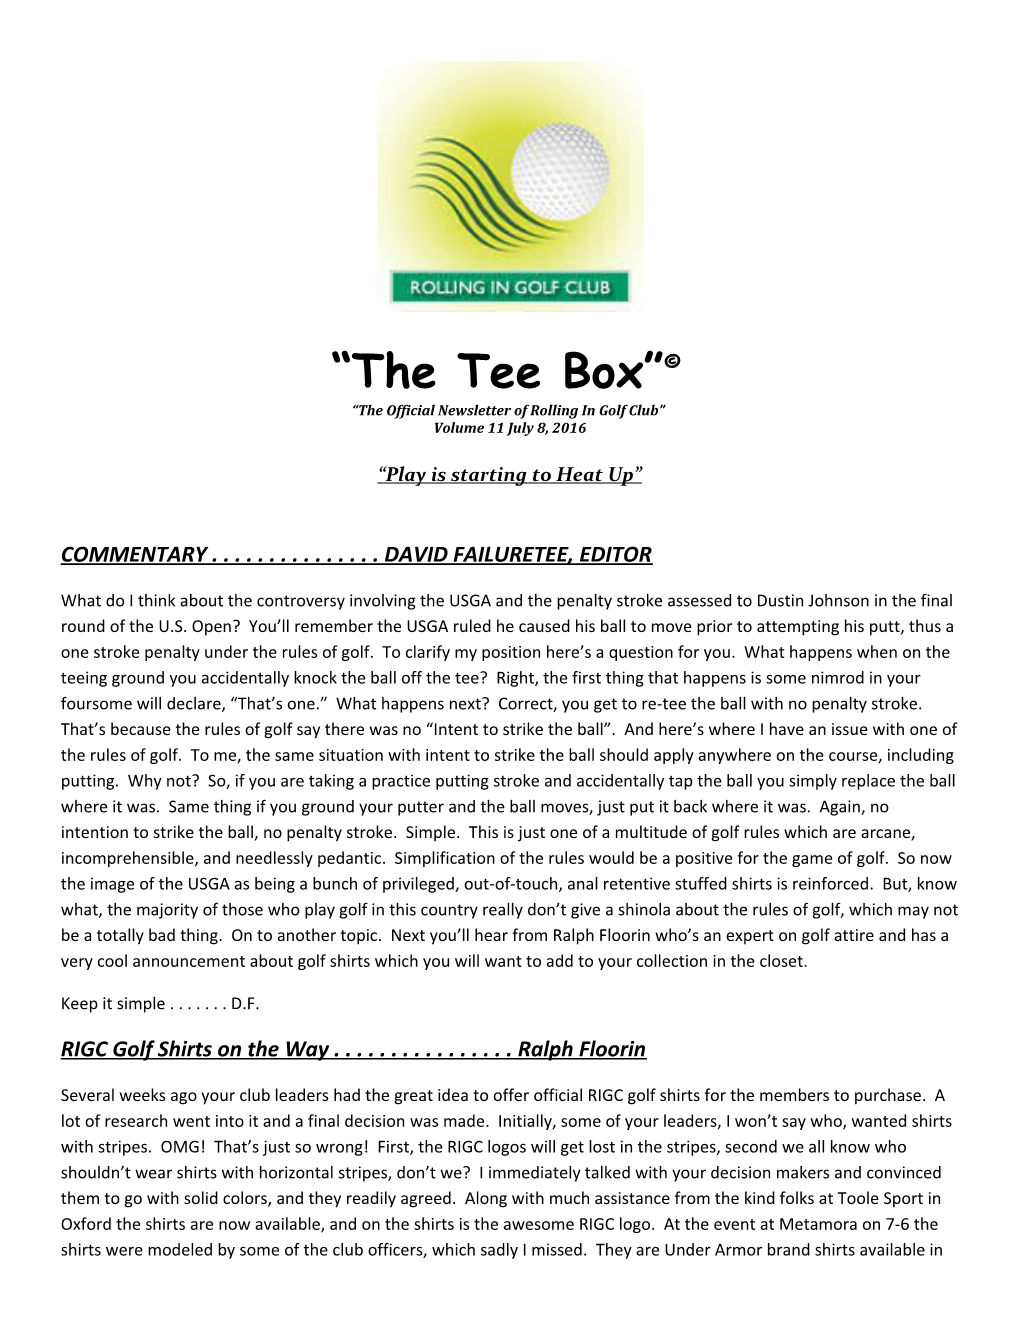 The Official Newsletter of Rolling in Golf Club